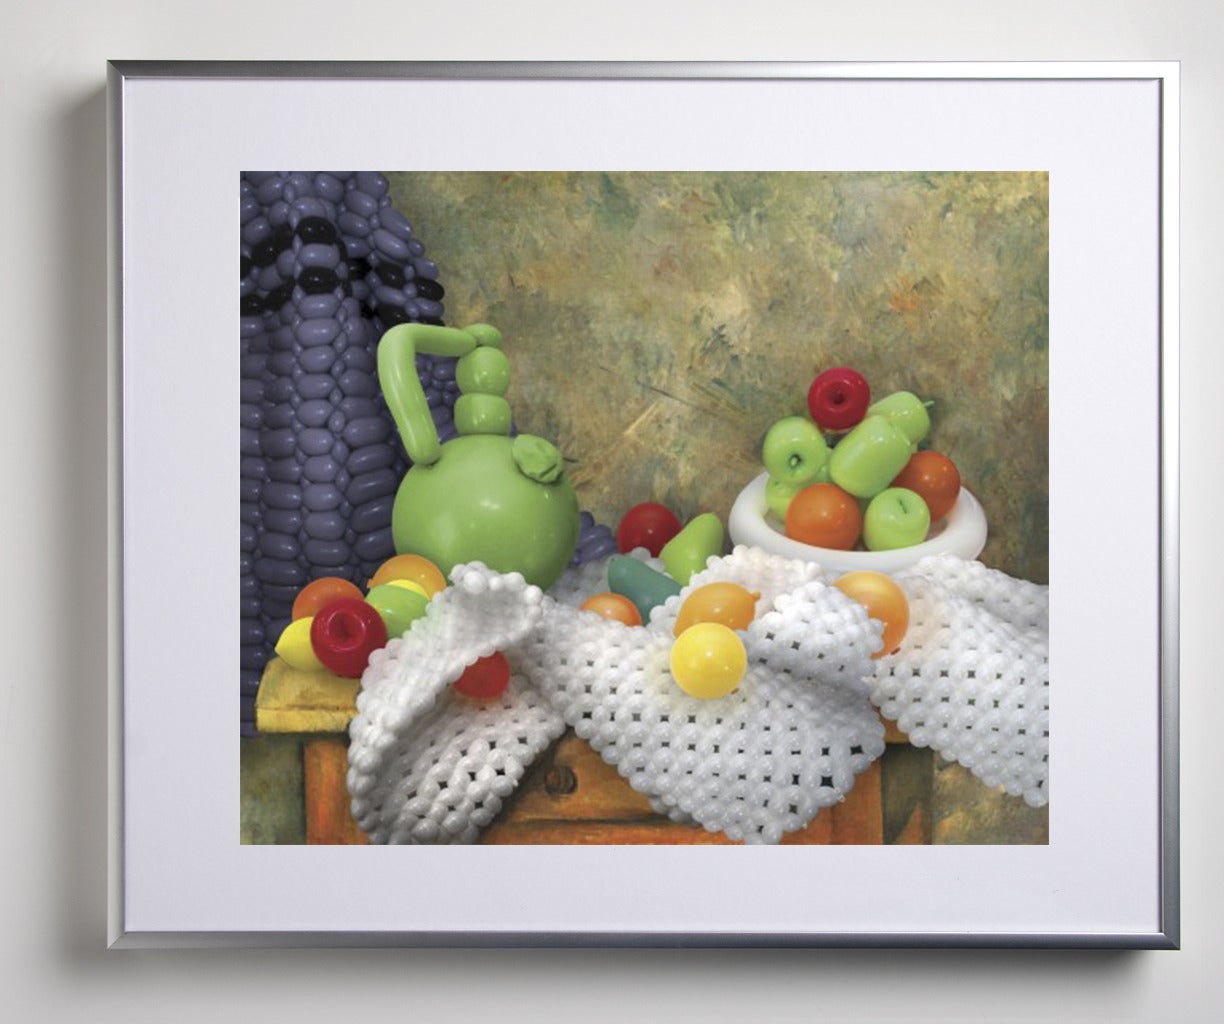 Still Life with Fruit - Photograph by Larry Moss